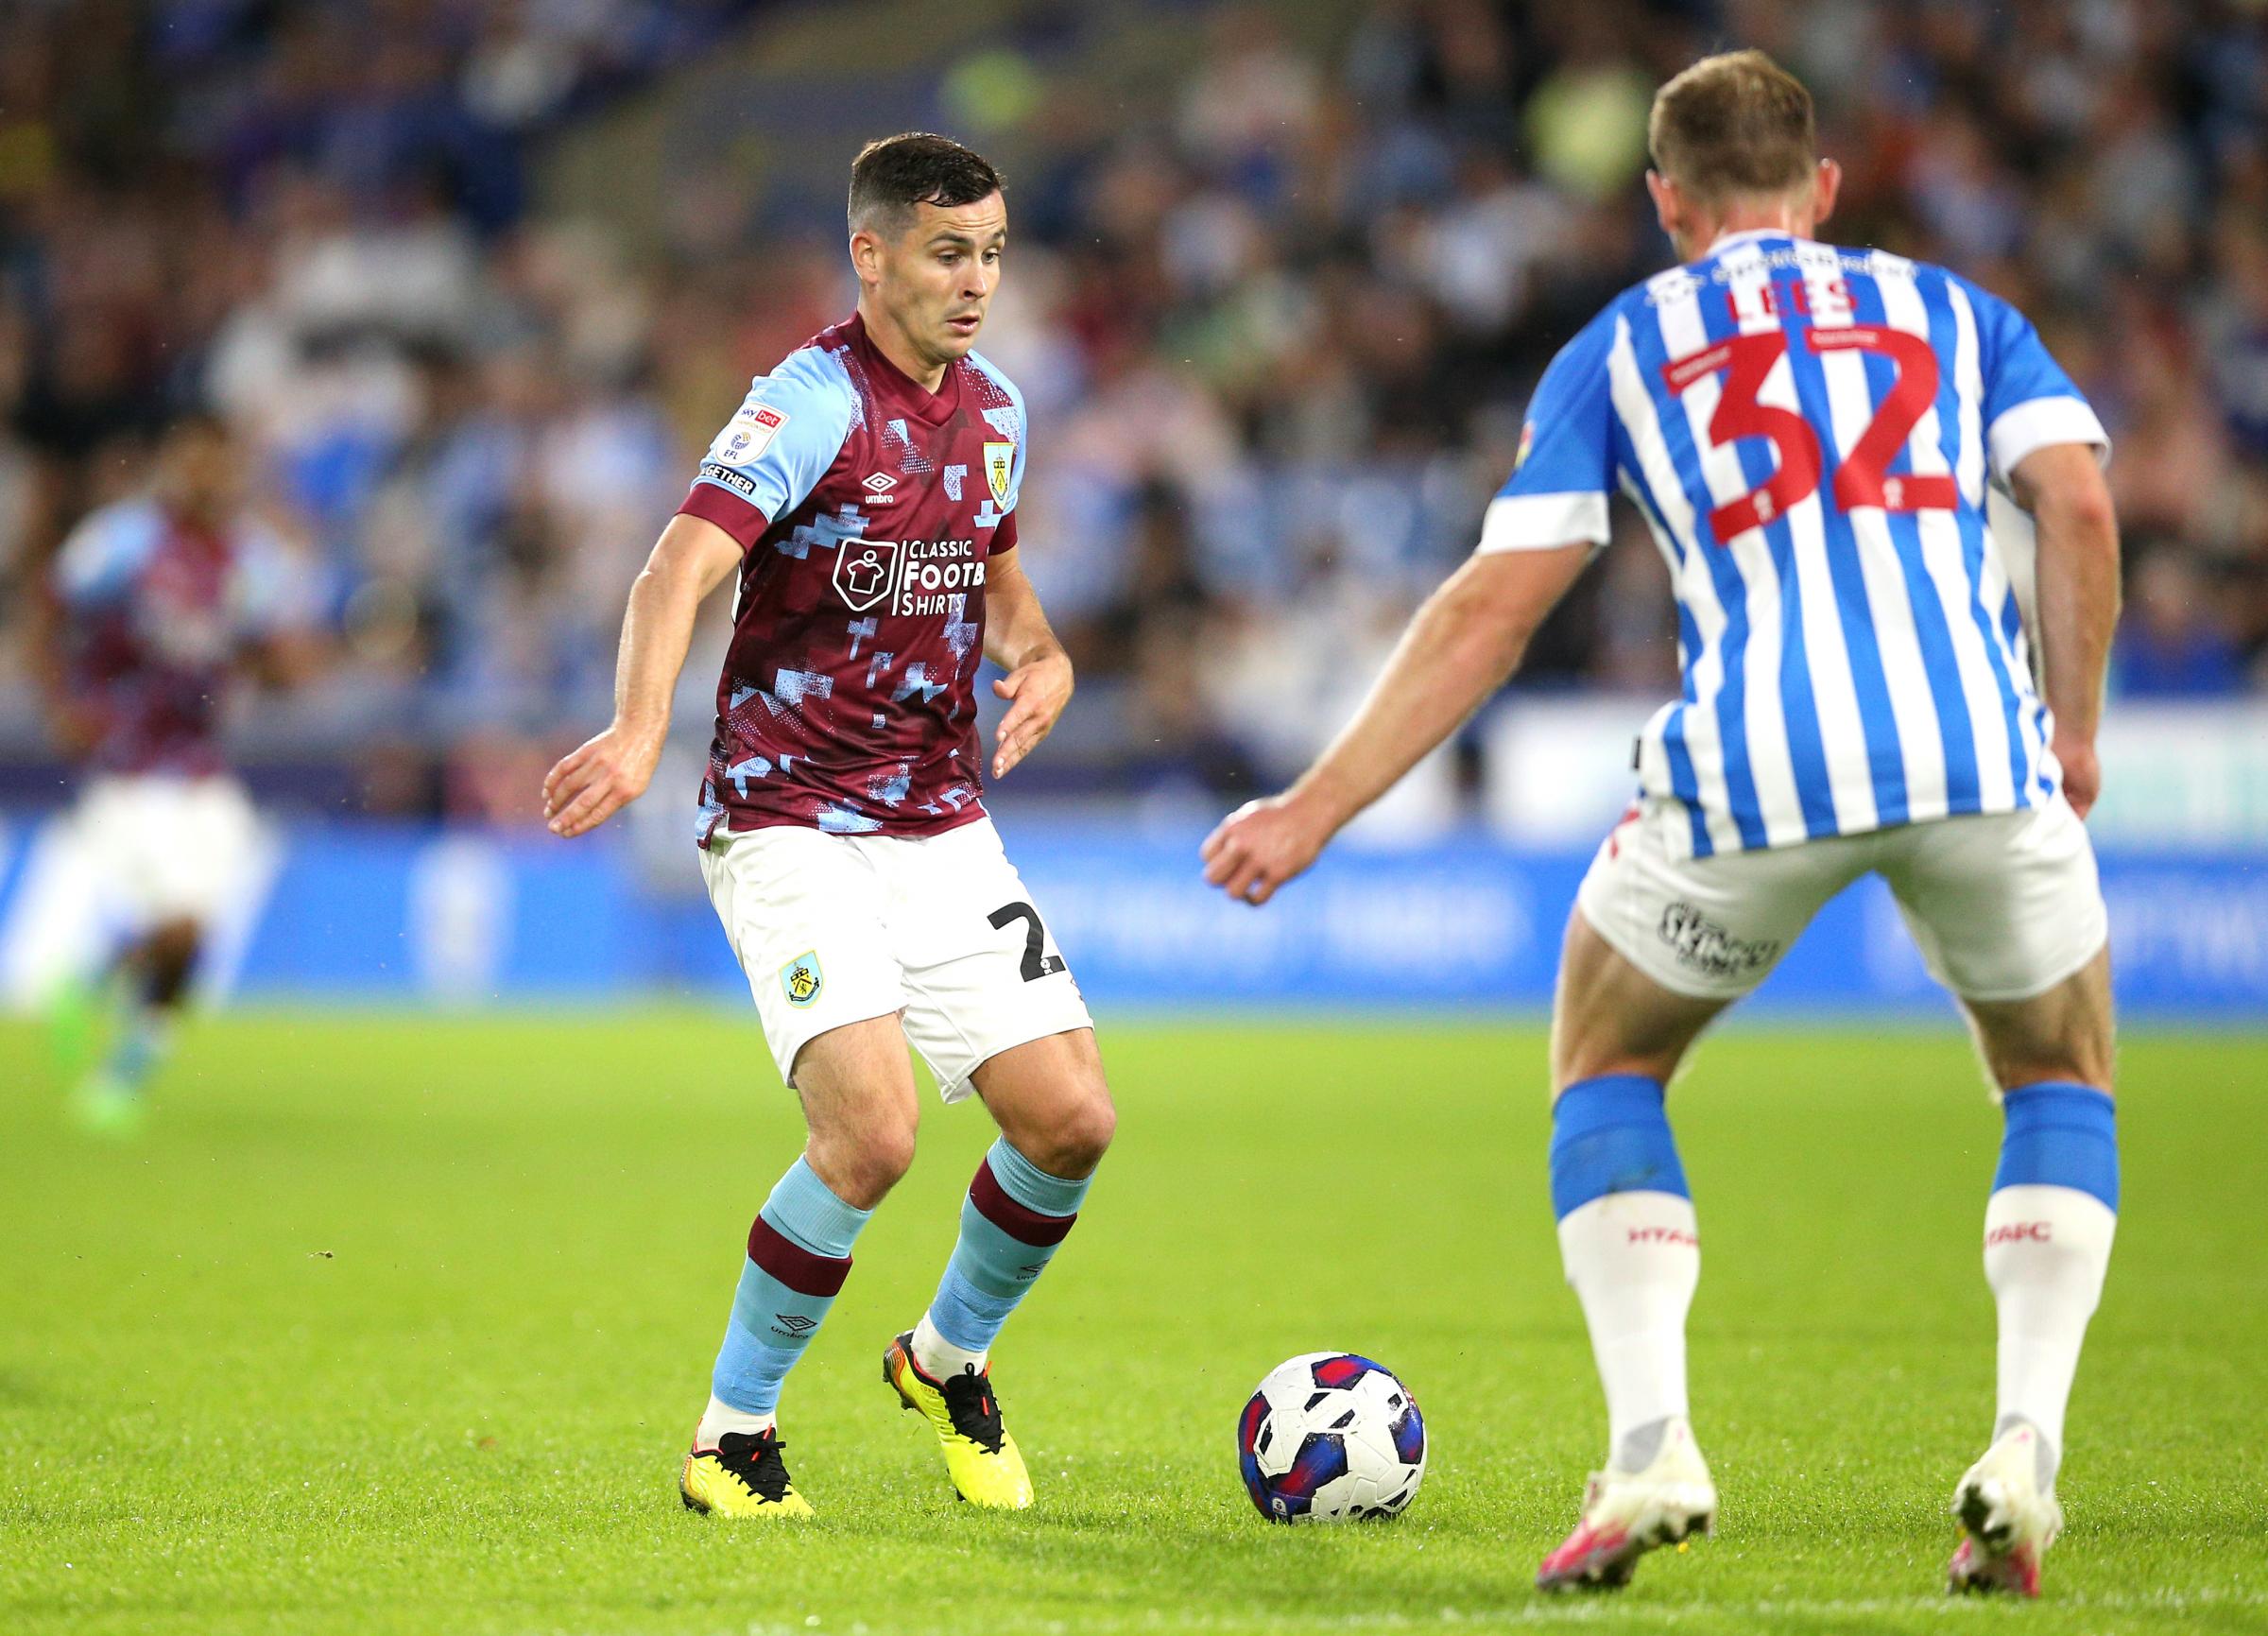 Republic of Ireland midfielder Josh Cullen on Burnley move and relationship with Vincent Kompany